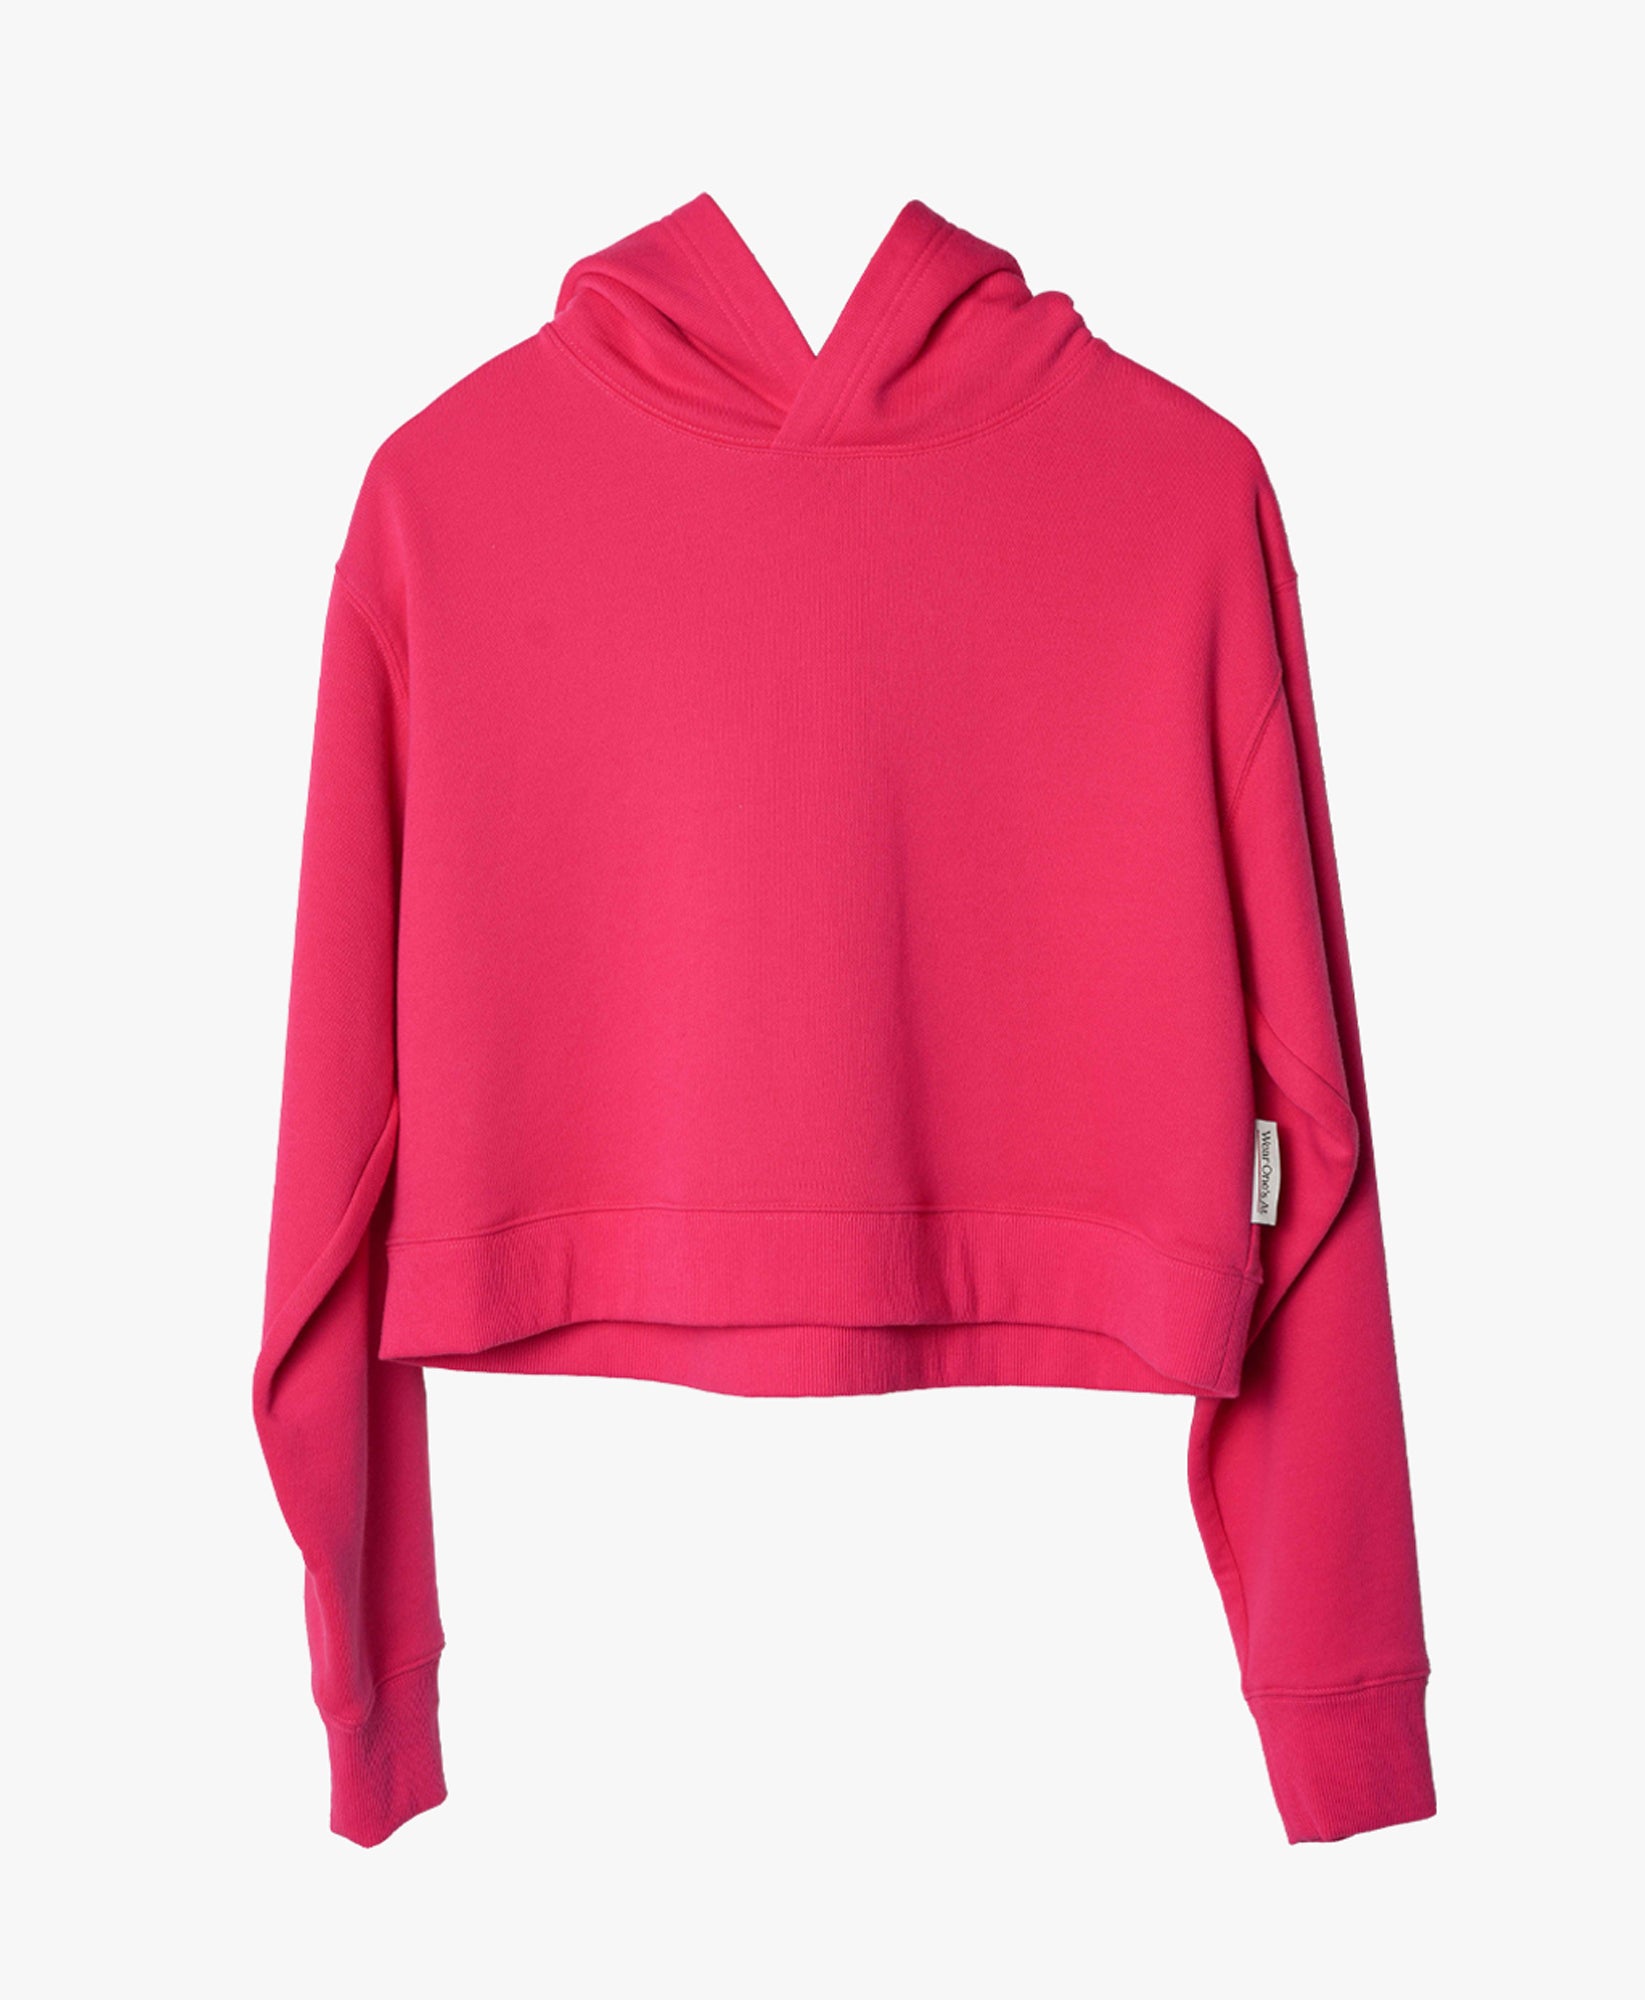 Wear One's At French Terry Cropped Hoodie in Watermelon Pink Flat Front